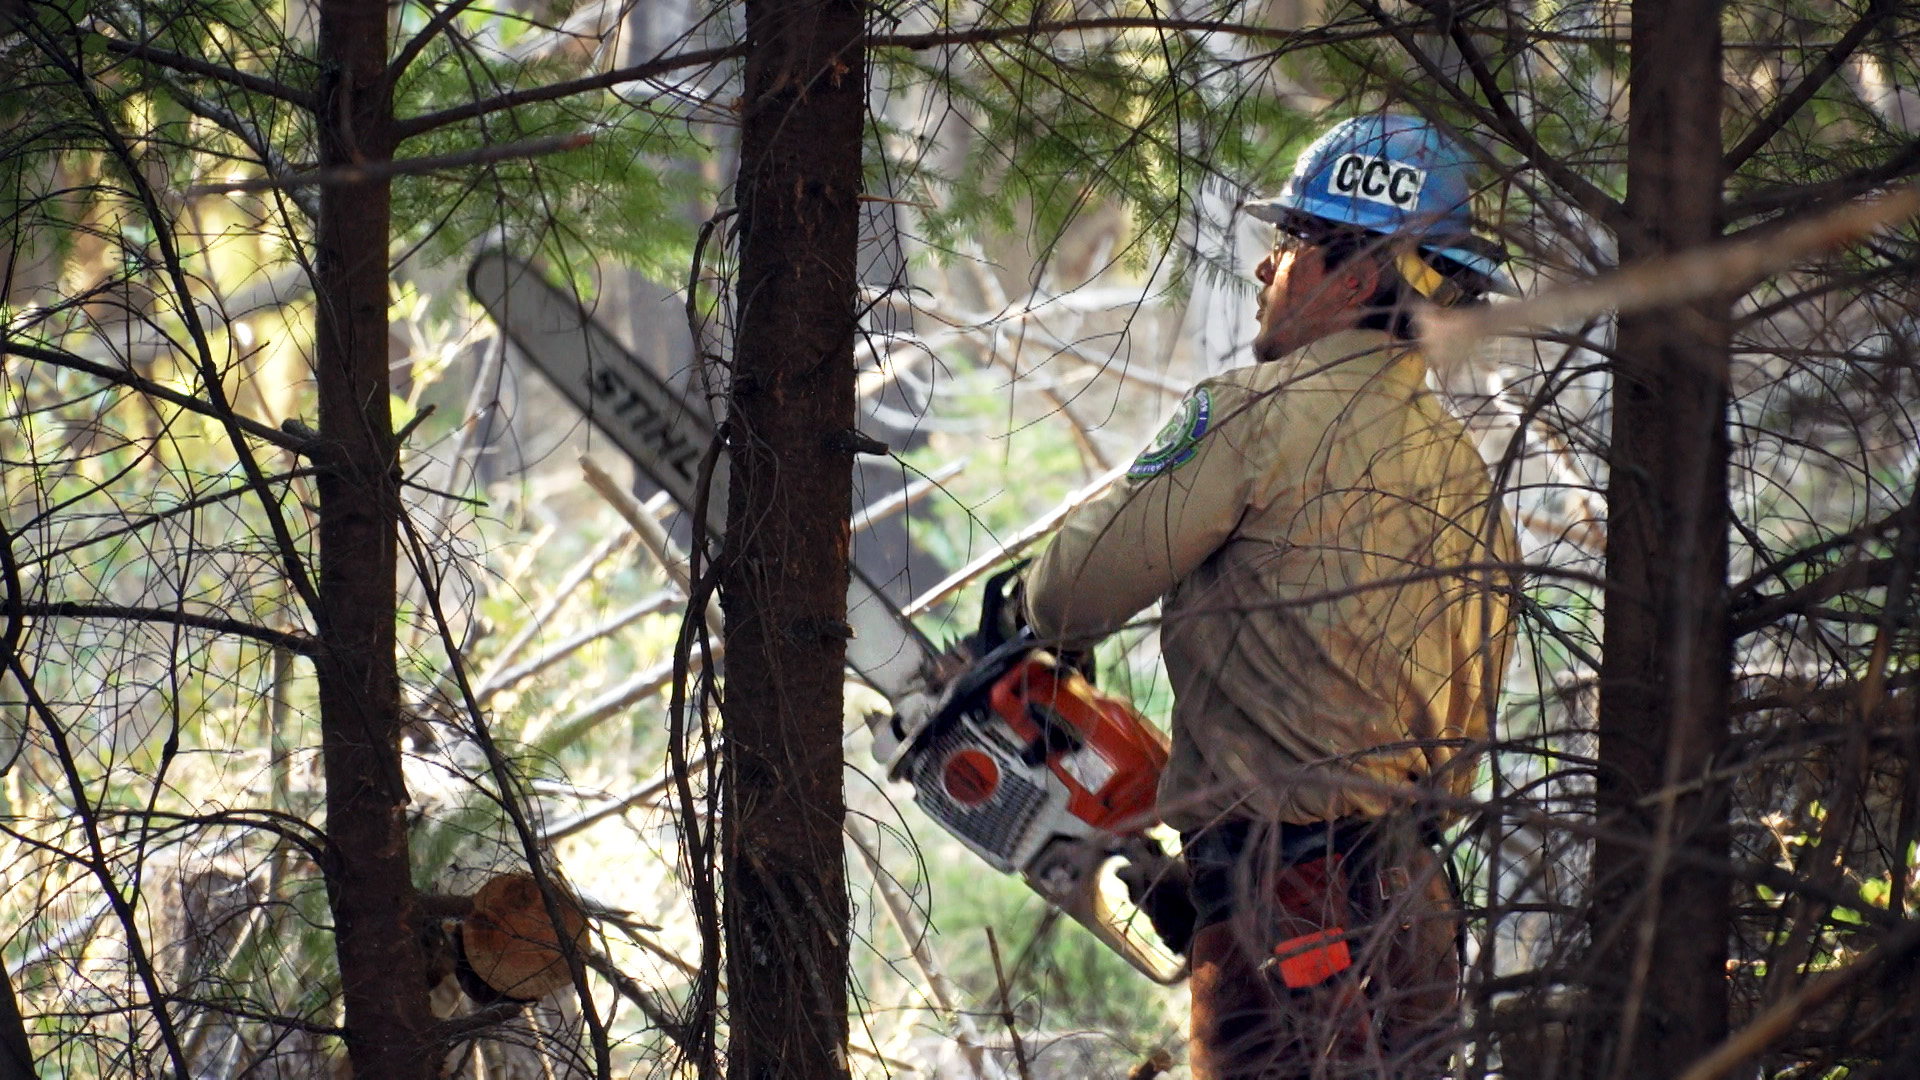 Male Corpsmember in safety equipment uses chain saw to cut down branches in forest.